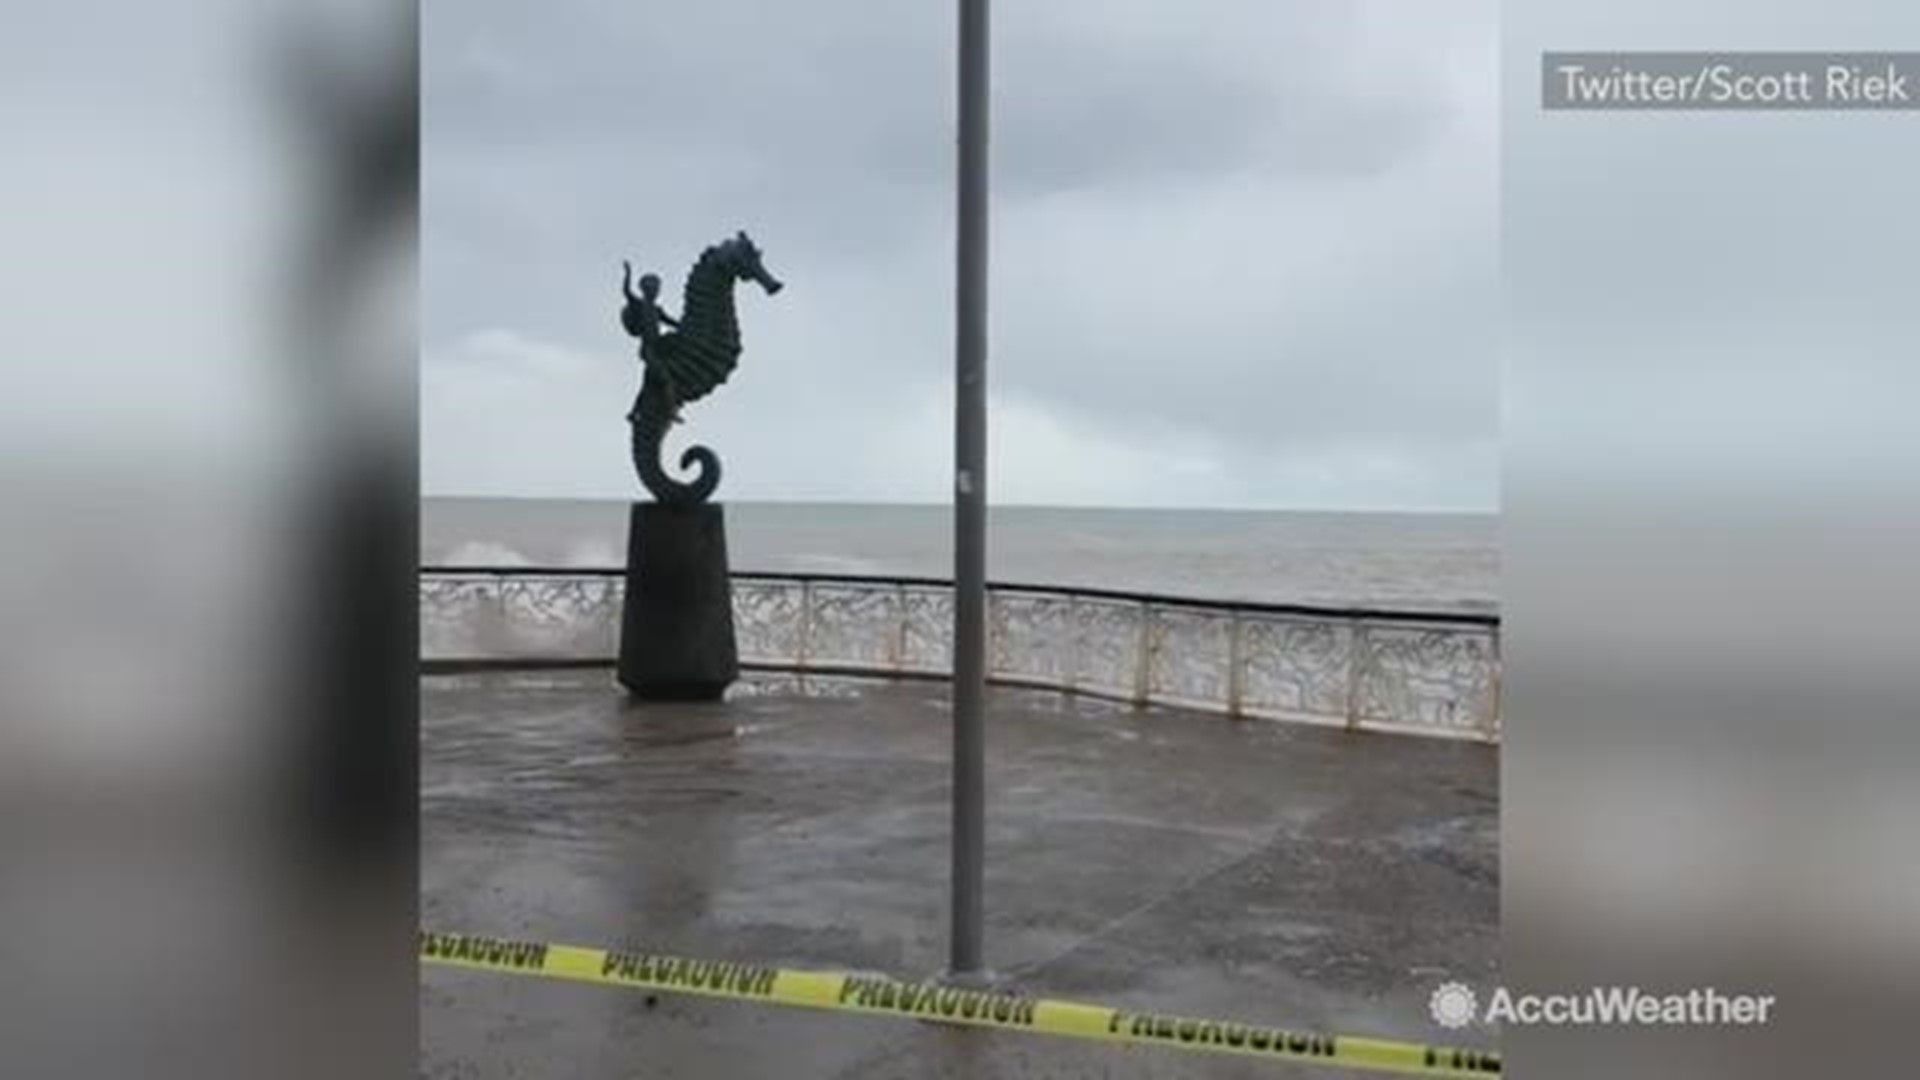 The 'Malecon', a favorite city boardwalk, has been closed in Puerto Vallarta due to high waves as Hurricane Willa draws near.